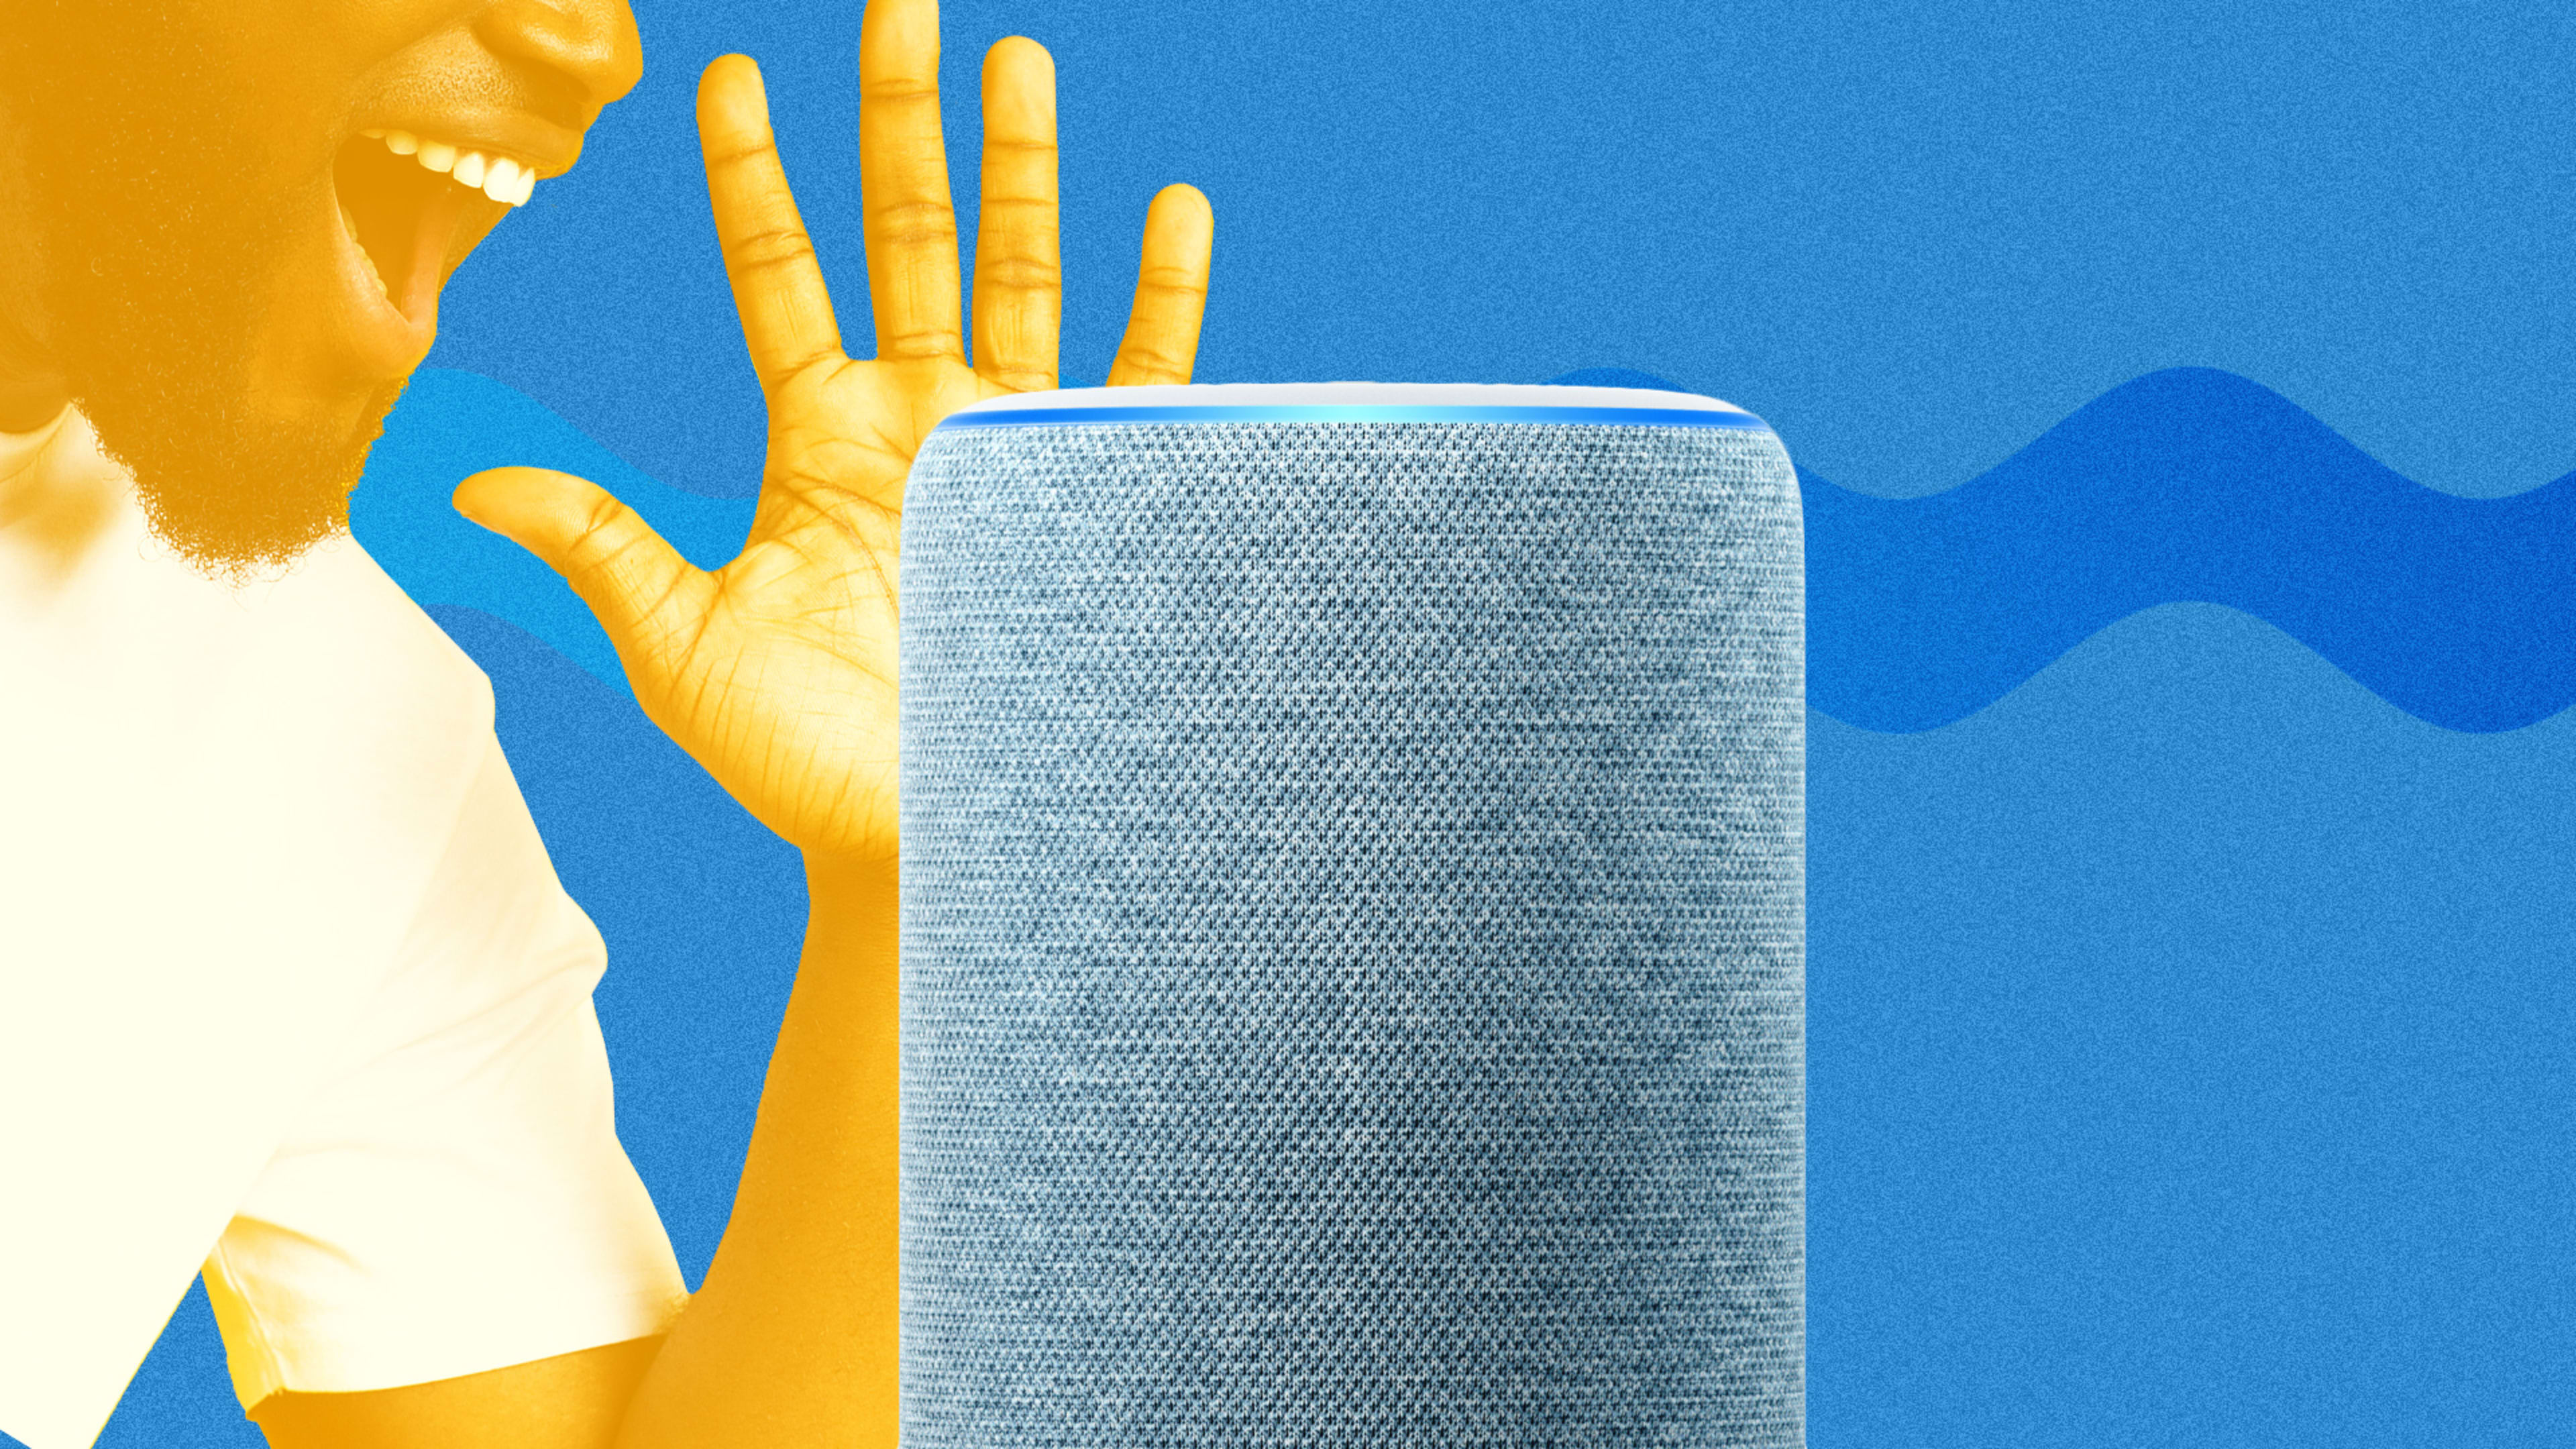 These 9 cool tricks unleash the power of Amazon’s Alexa assistant